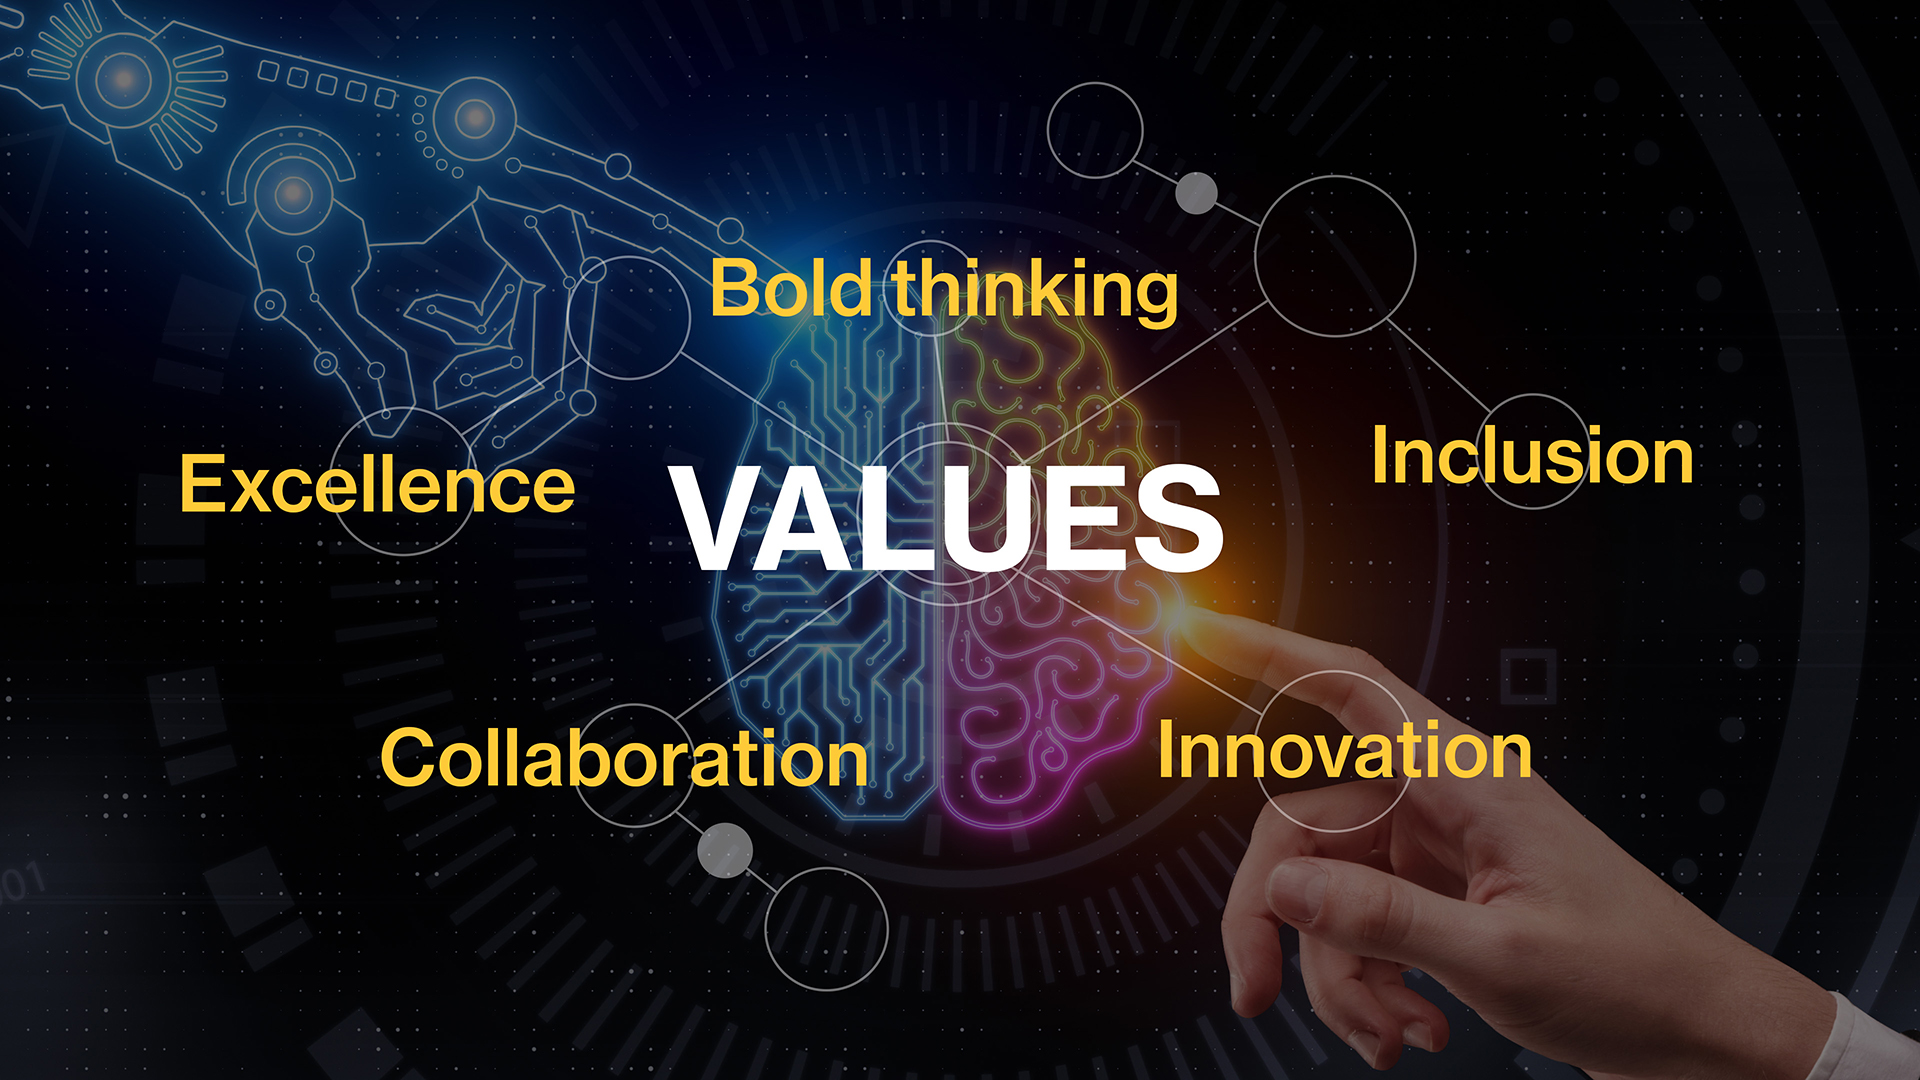 A graphic featuring a human hand and robotic hand touching a brain with the words: Values, Bold thinking, Inclusion, Innovation, Excellence, Collaboration